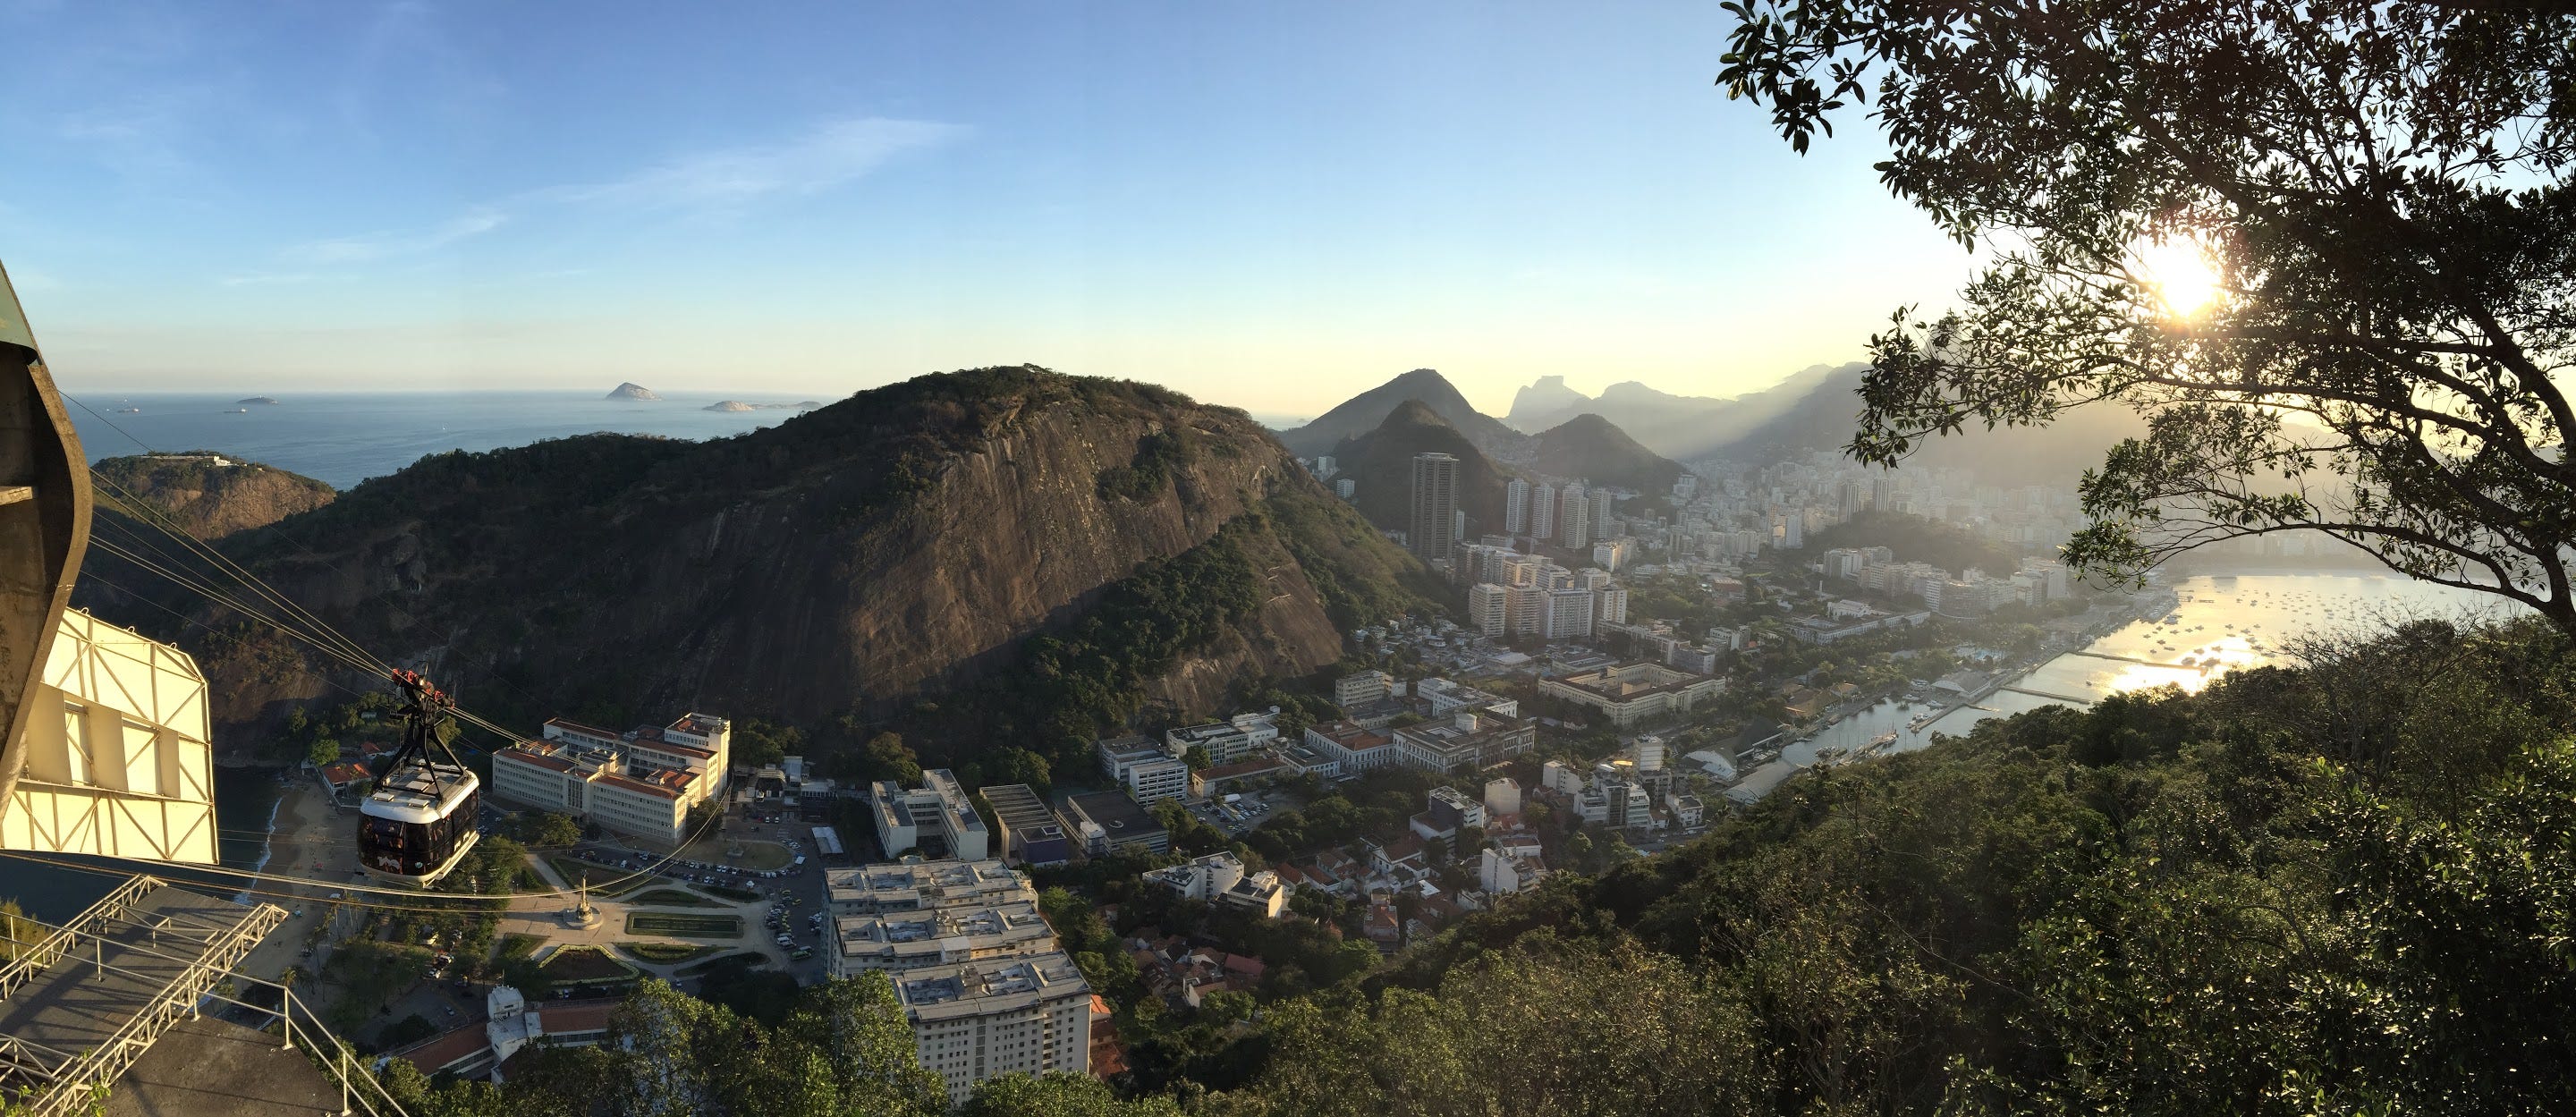 Rio Imperio Turismo - All You Need to Know BEFORE You Go (with Photos)